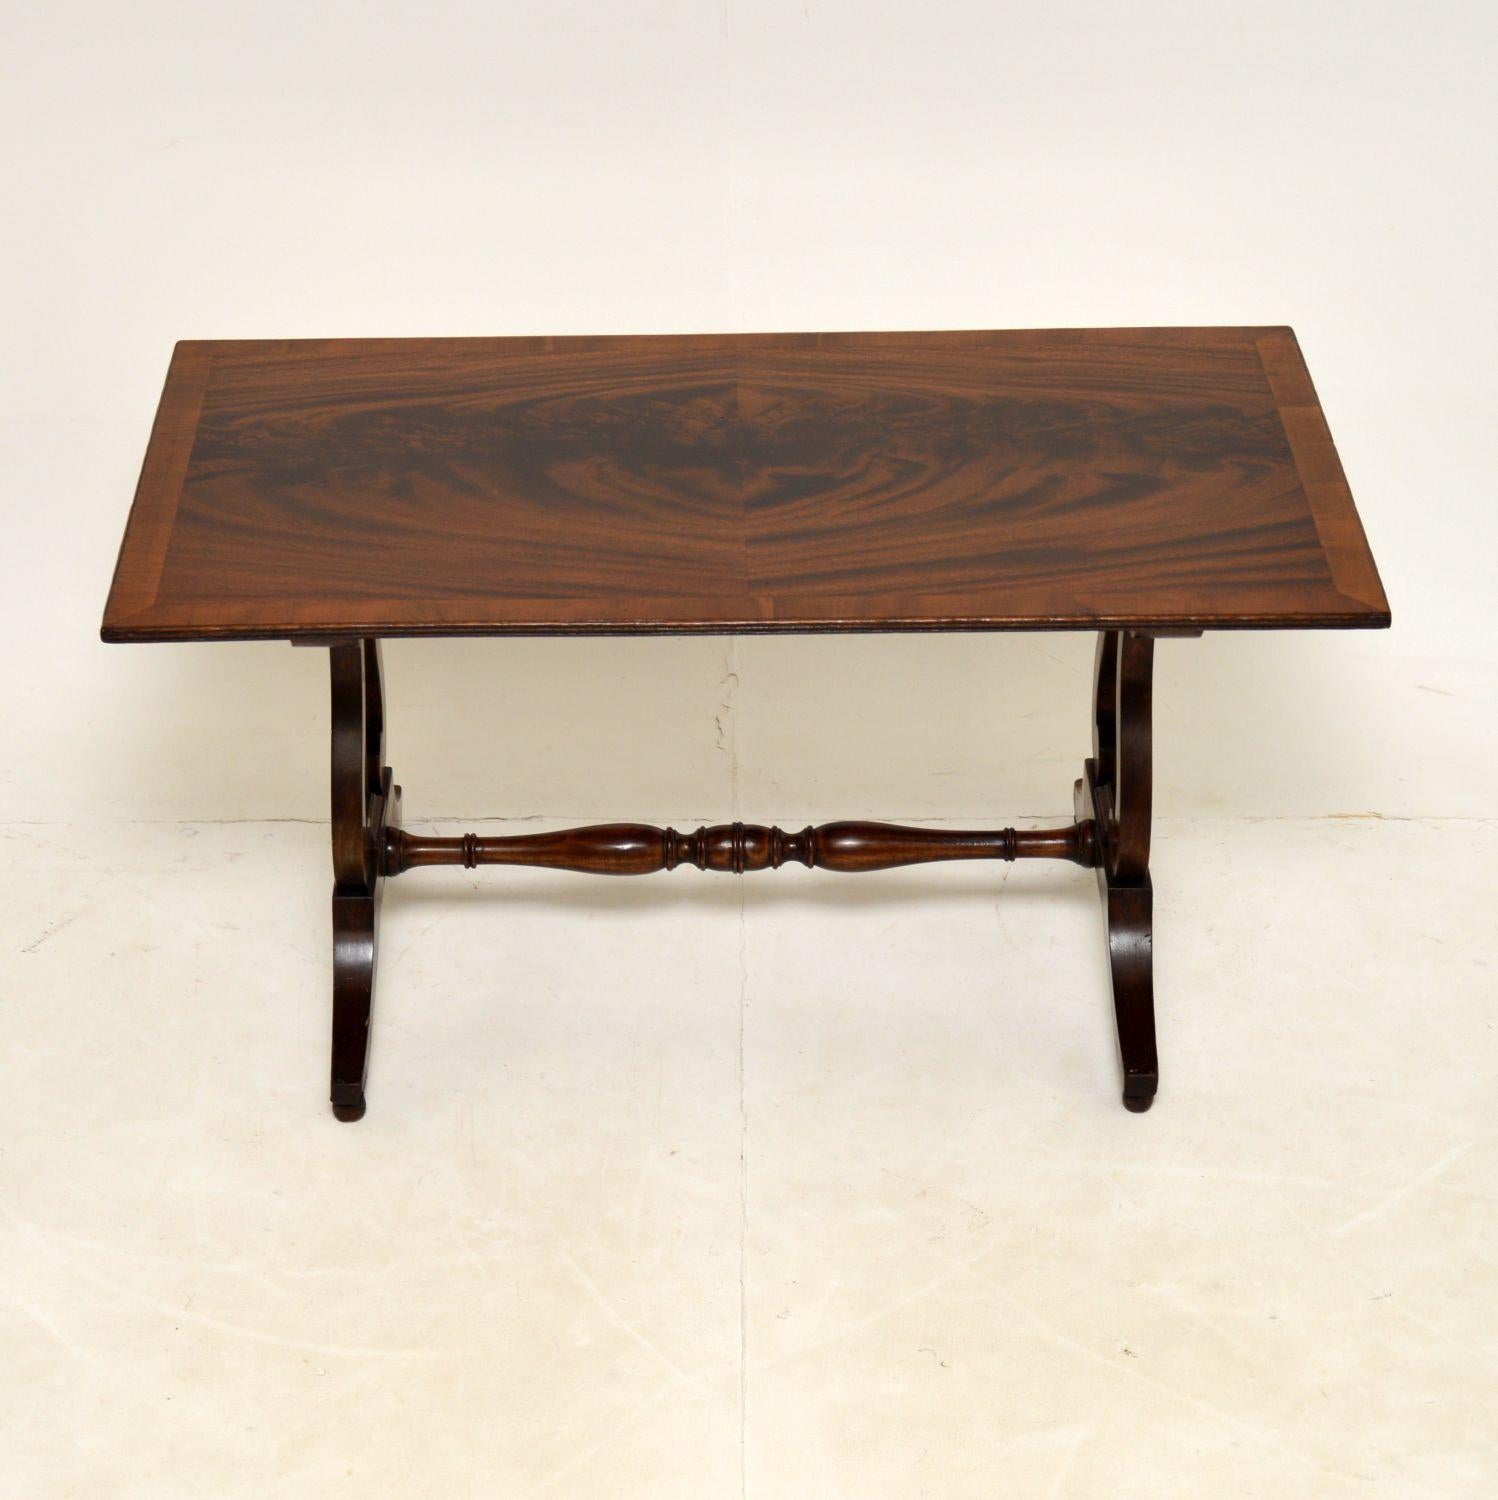 A beautiful antique coffee table in the Regency style, made in England & dating from around the 1930-1950’s period.

The quality is excellent and this is a very useful size. It has wonderful flame mahogany veneers on the top, with a cross banded